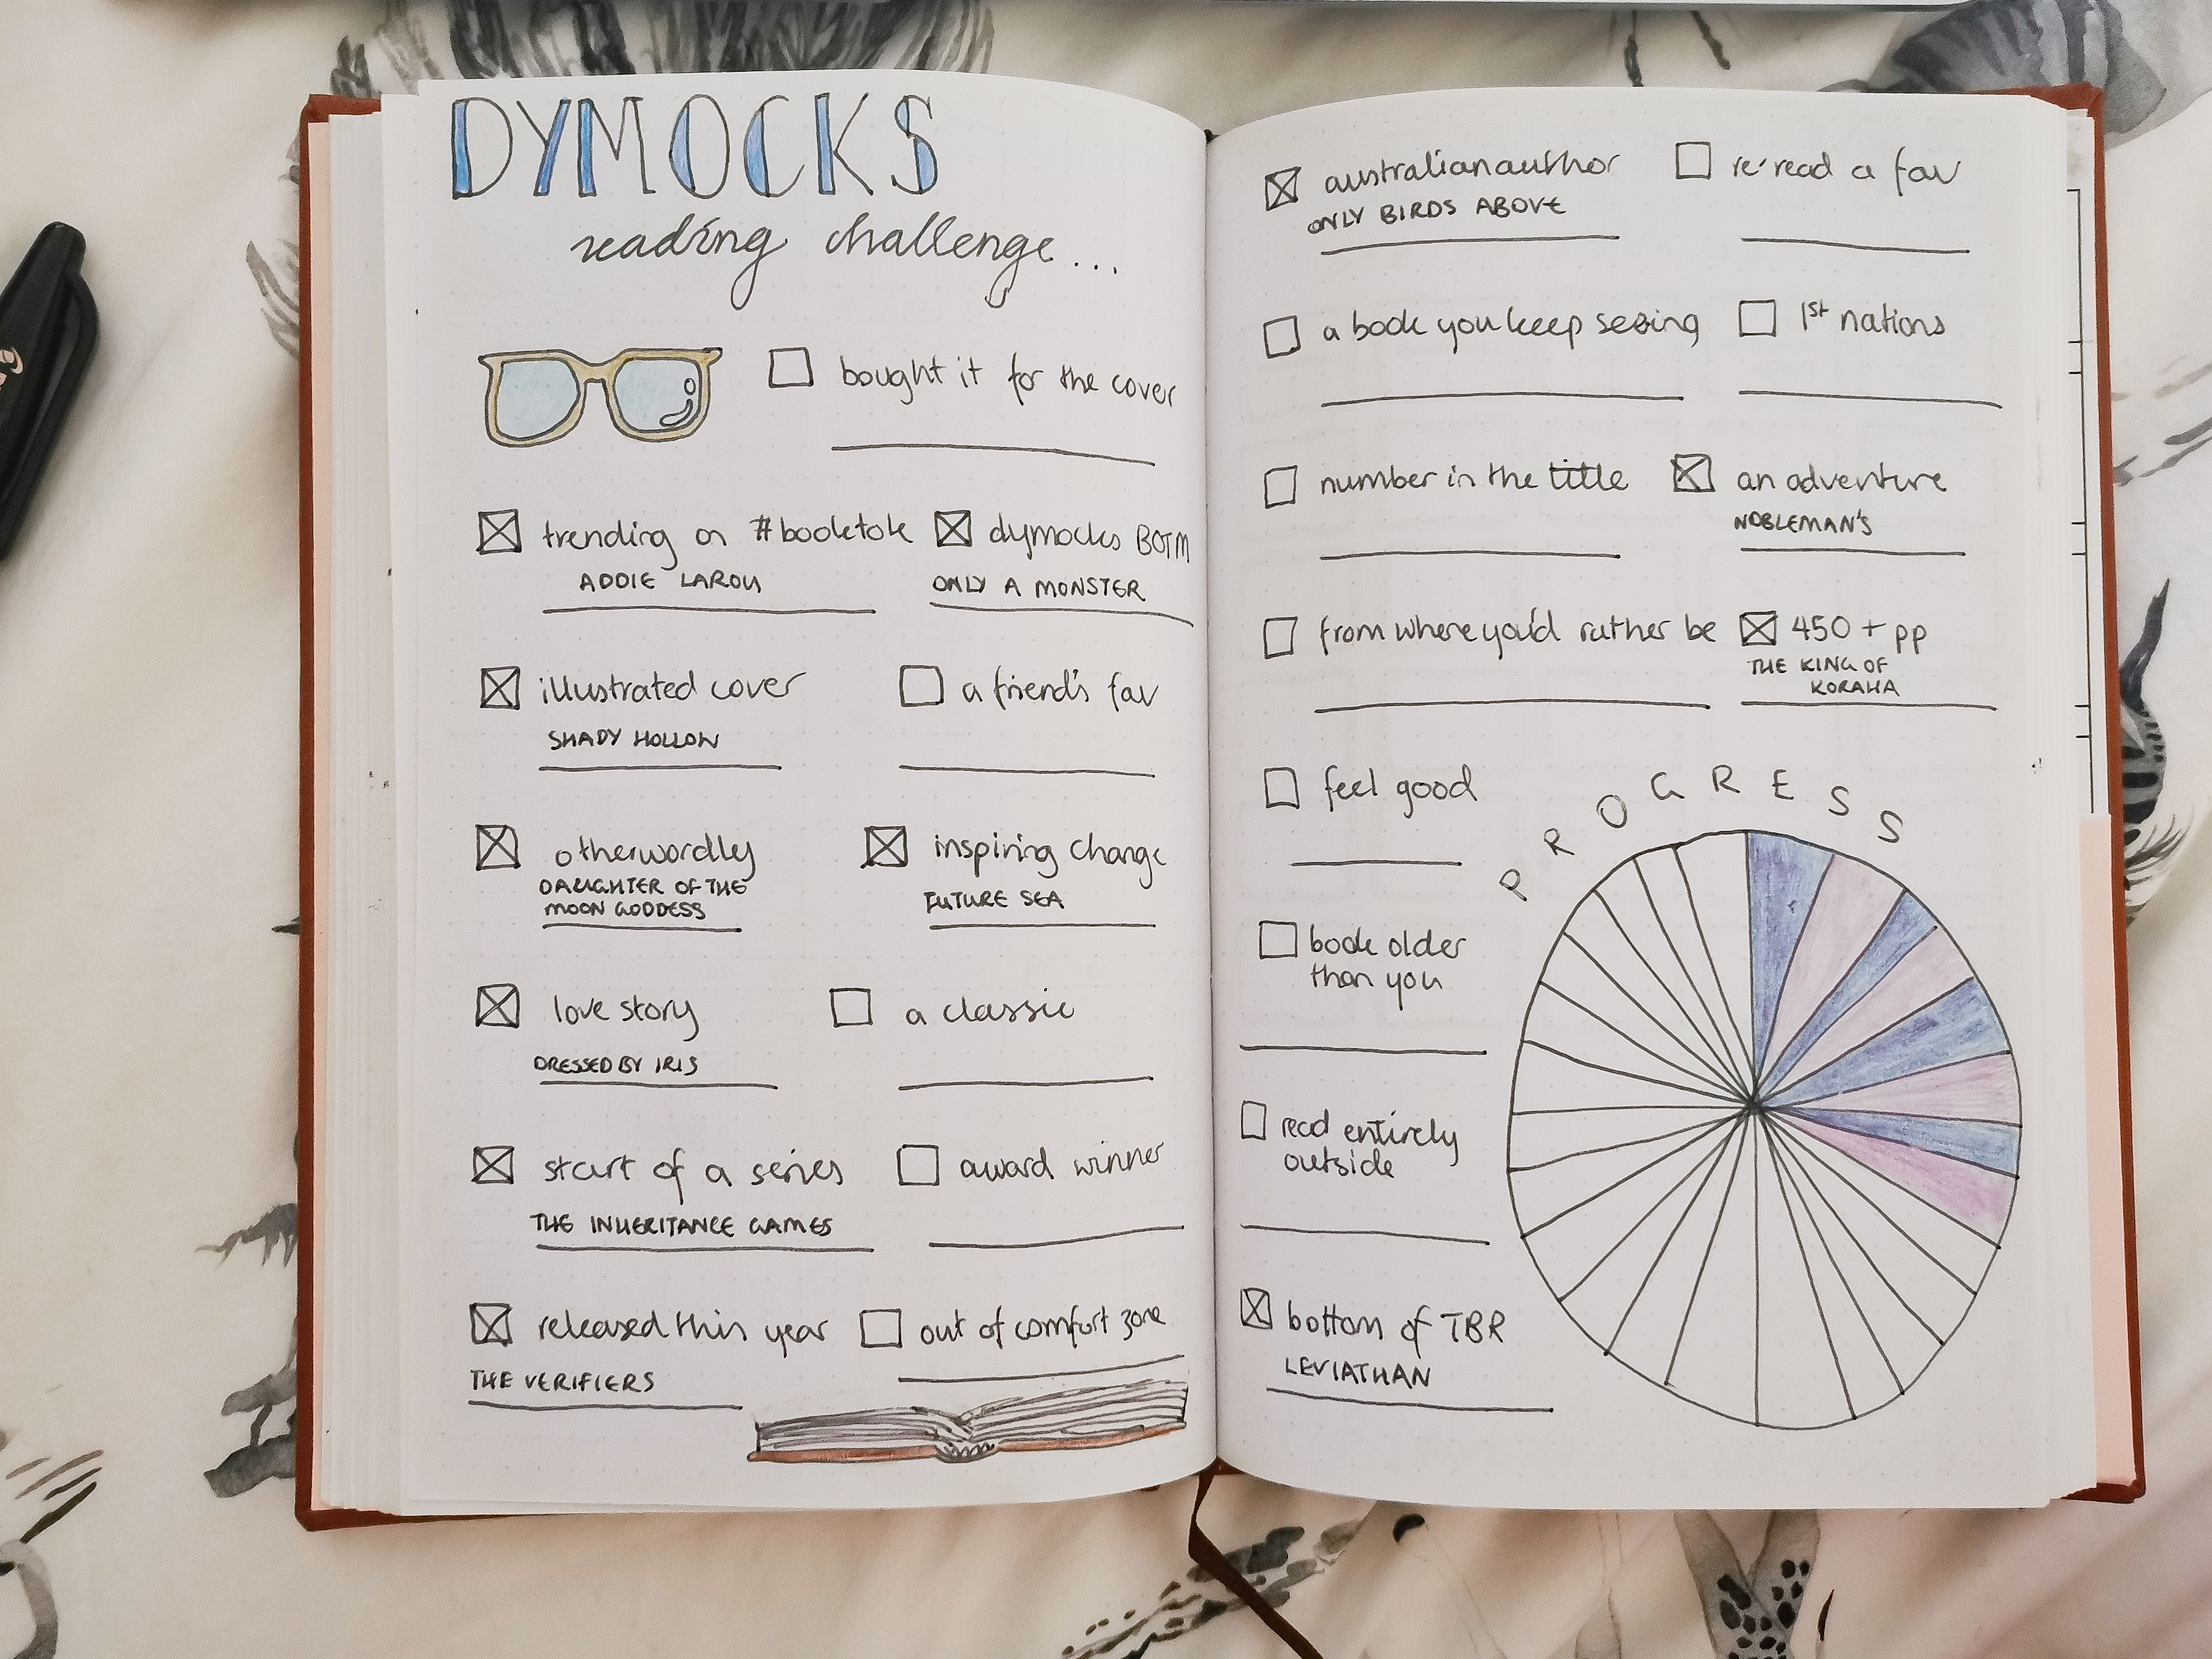 How To Create Book Review Spreads In Your Reading Journal